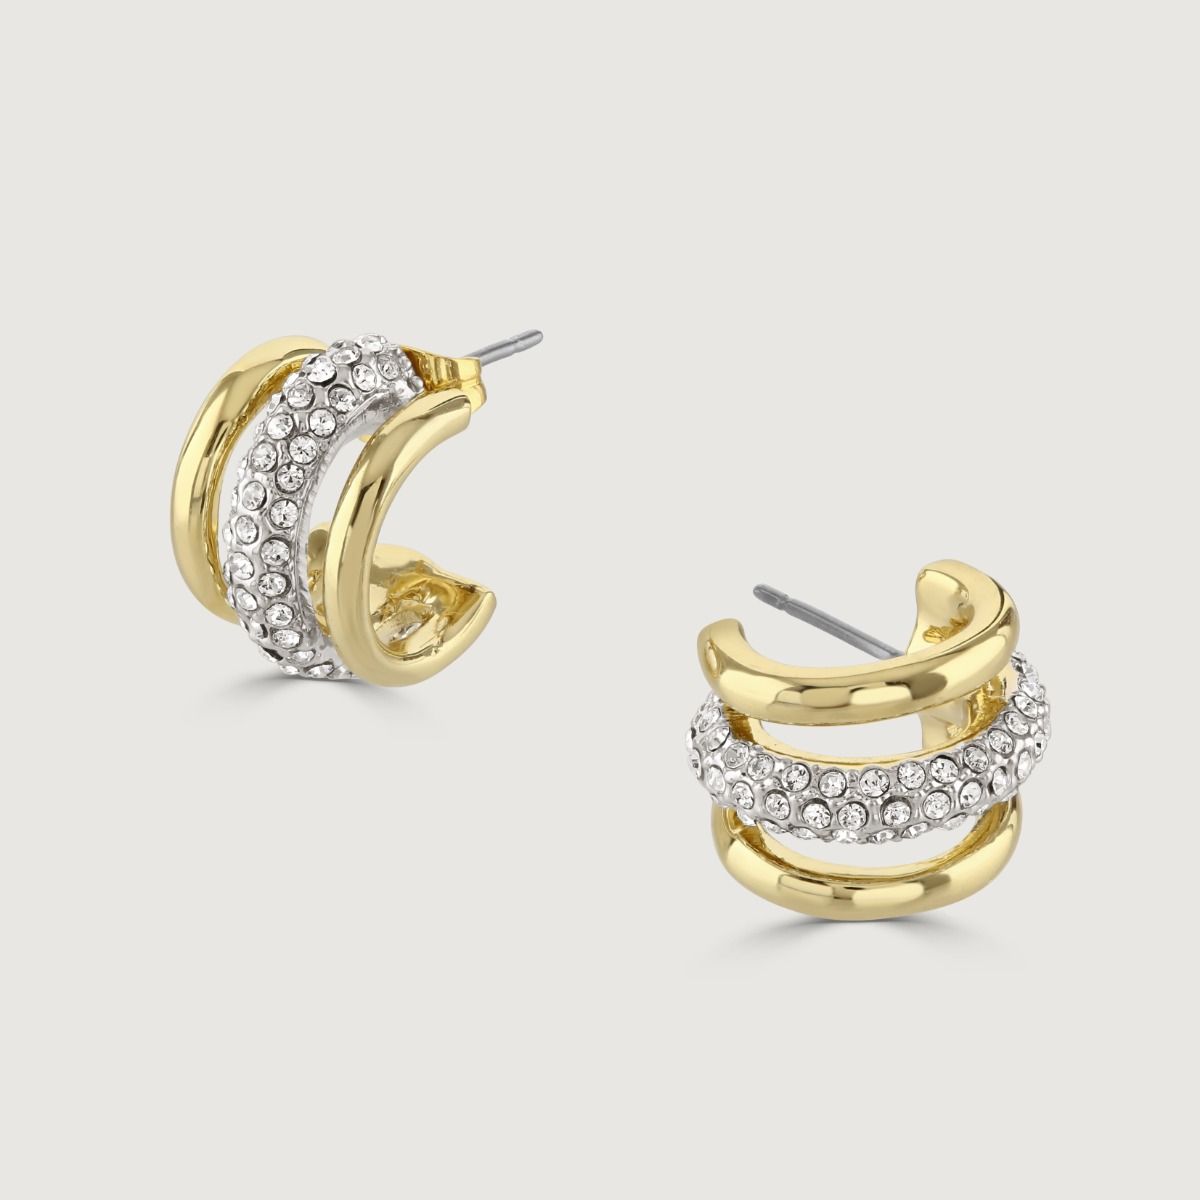 These beautiful half hoop earrings from the Aspire collection will add sophistication to any outfit. Featuring shimmering pave set crystals set into rhodium plating, wrapped between two bands of polished gold